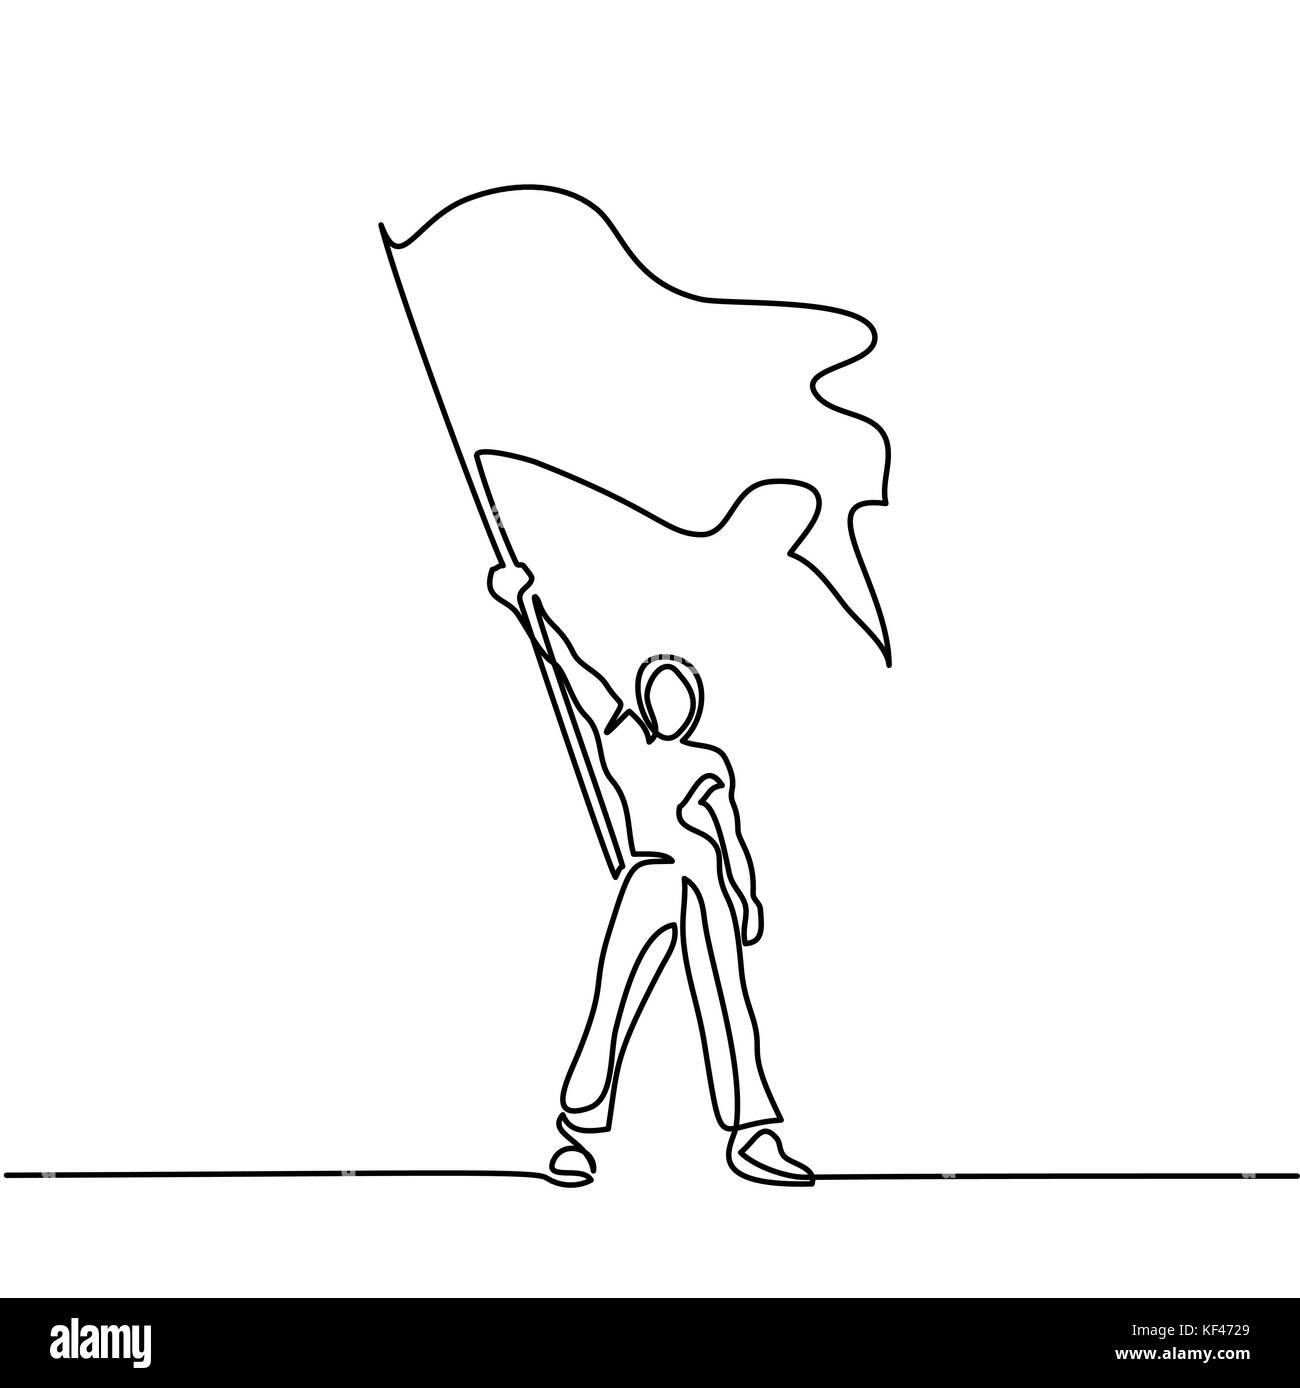 Man holding flag. Continuous line drawing Stock Vector